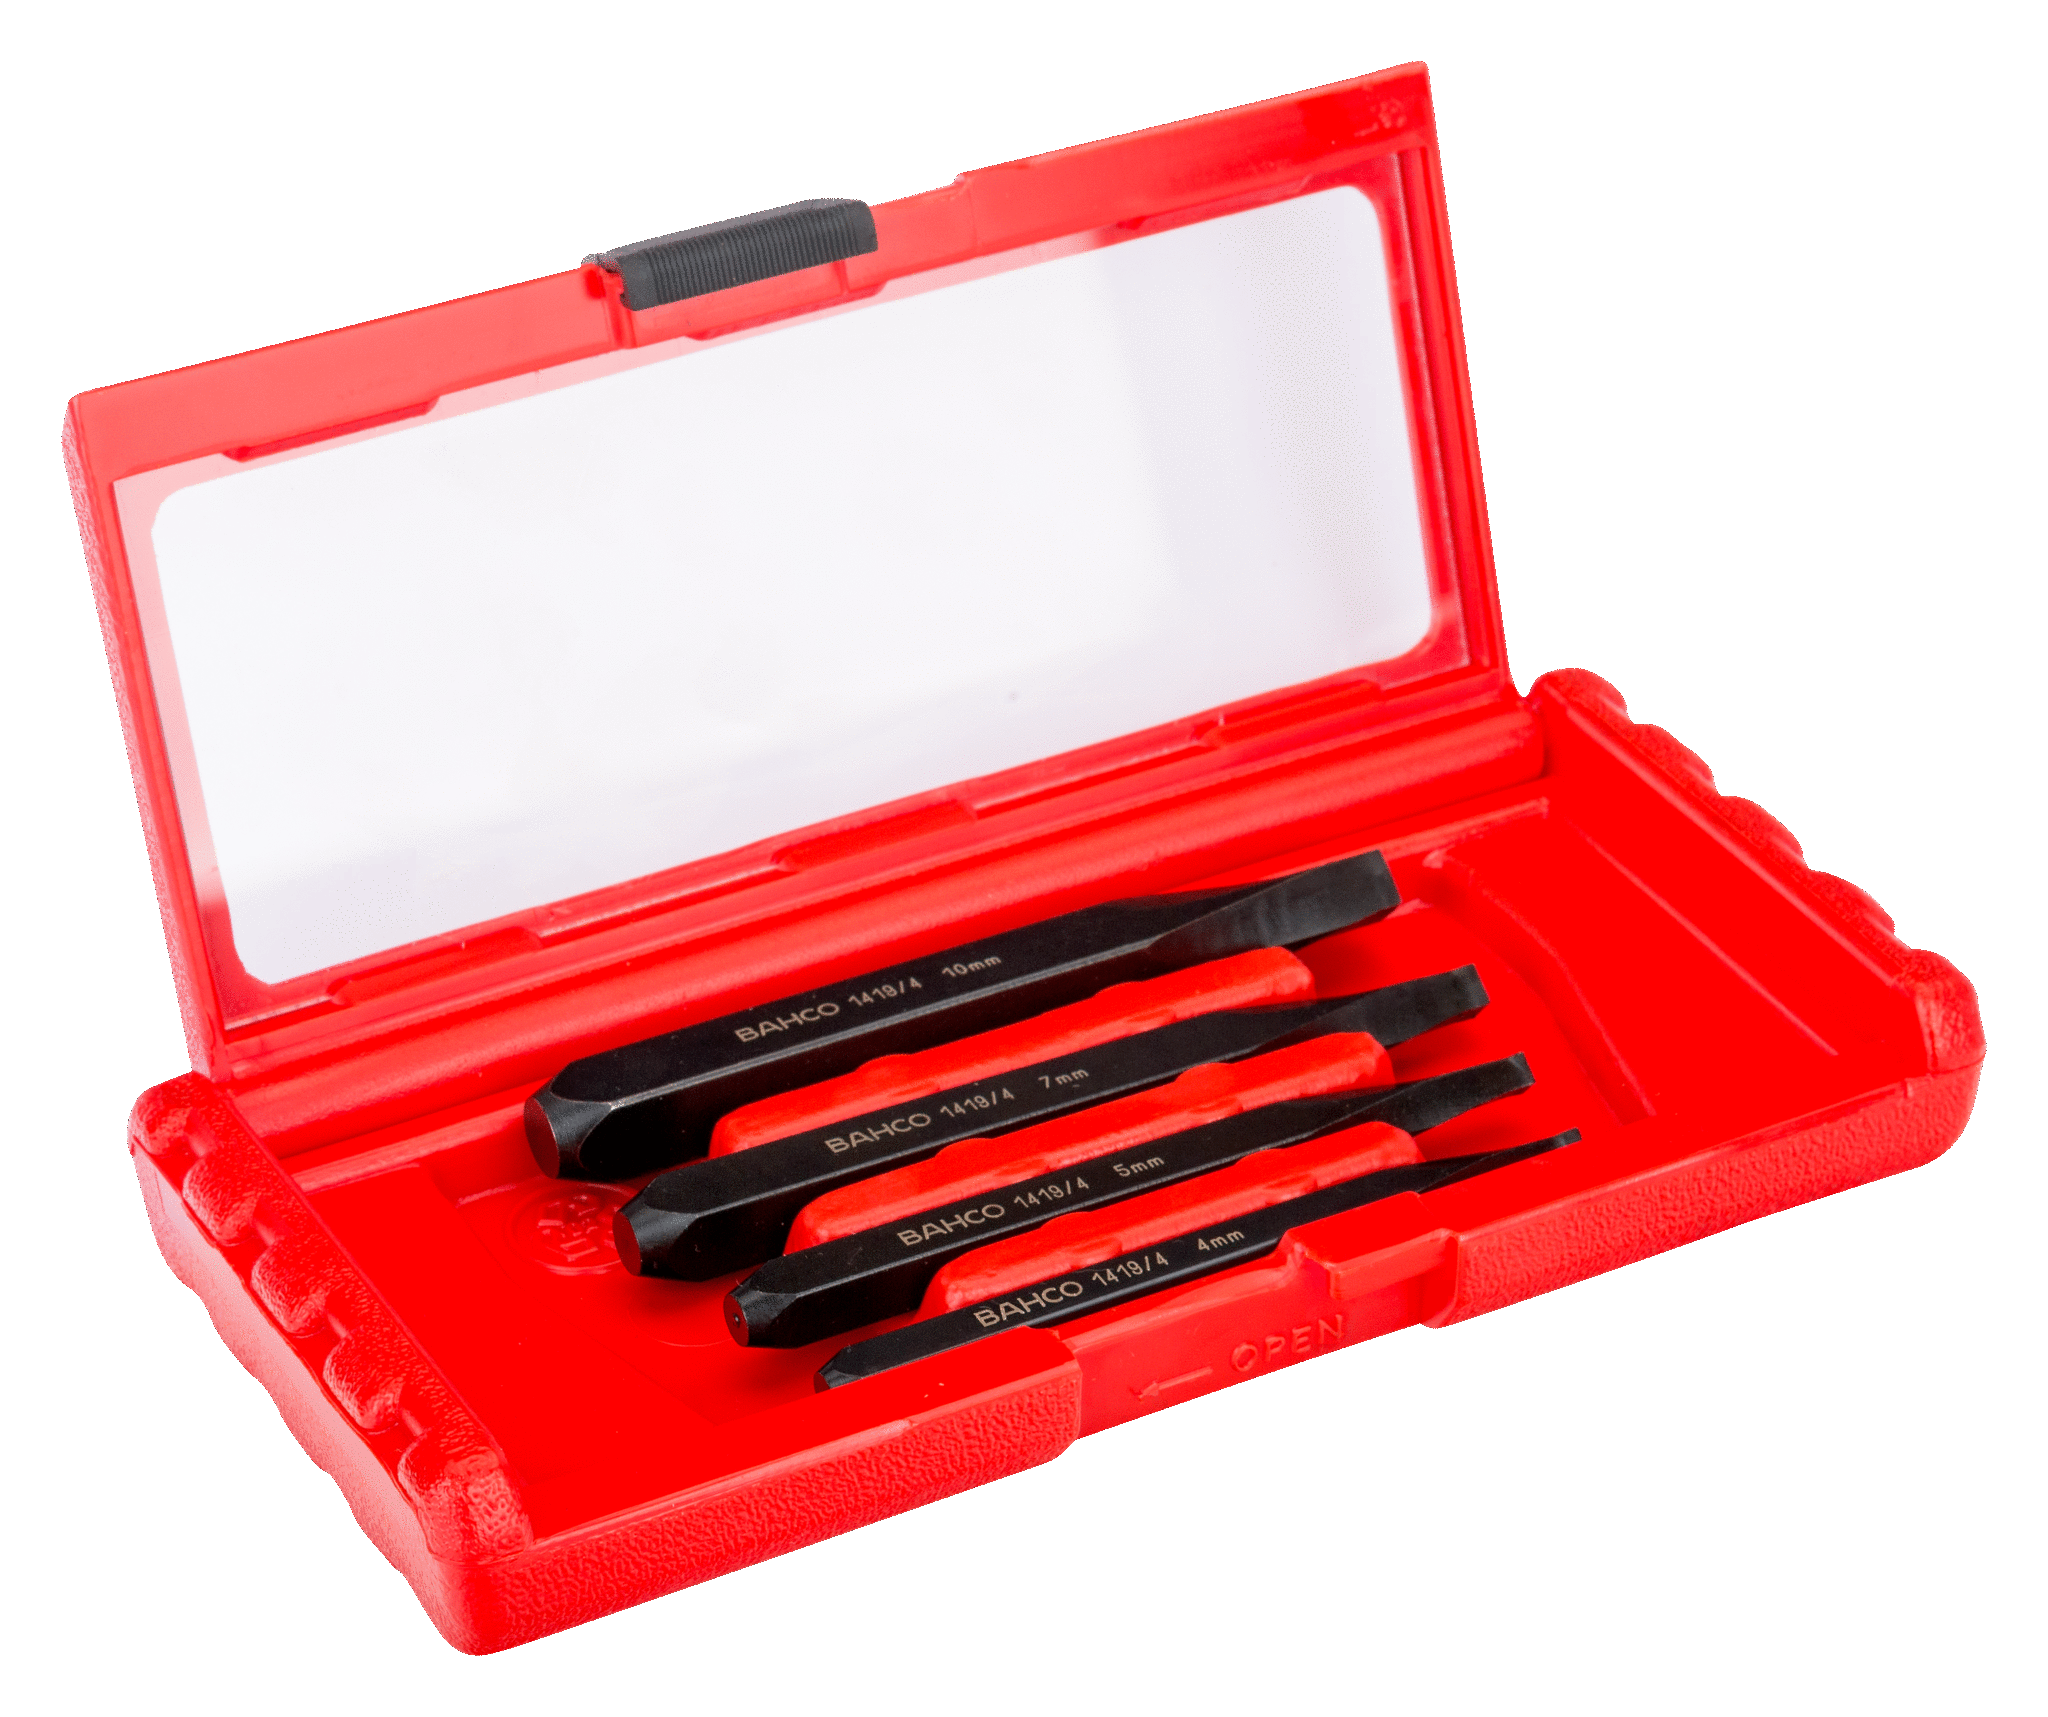 Remove Damaged studs 3-19 mm Details about   5 Piece Screw Extractor Set with Case 